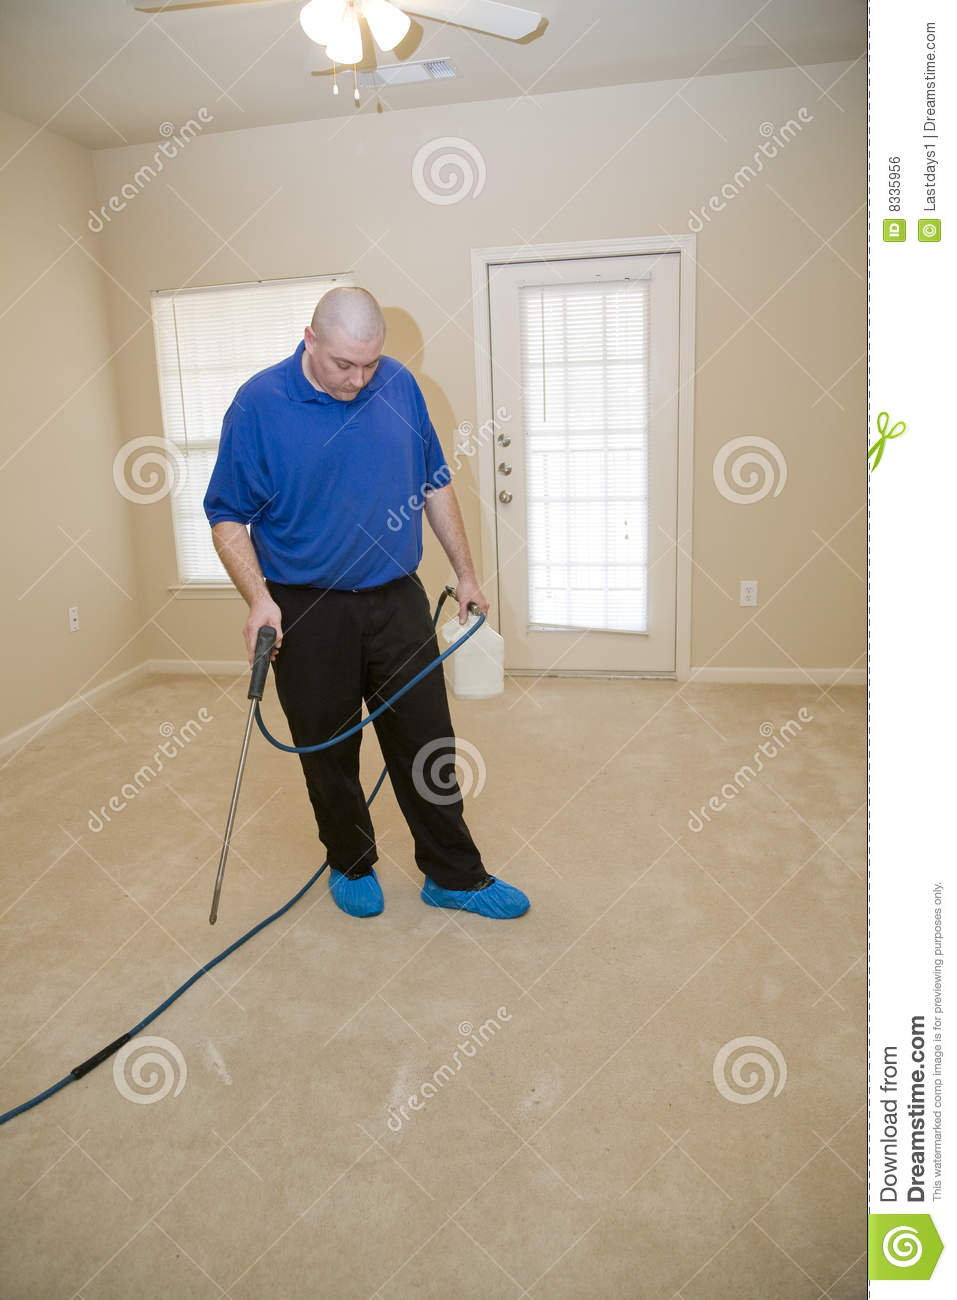 Carpet Steam Cleaning Royalty Free Stock Image   Image  8335956